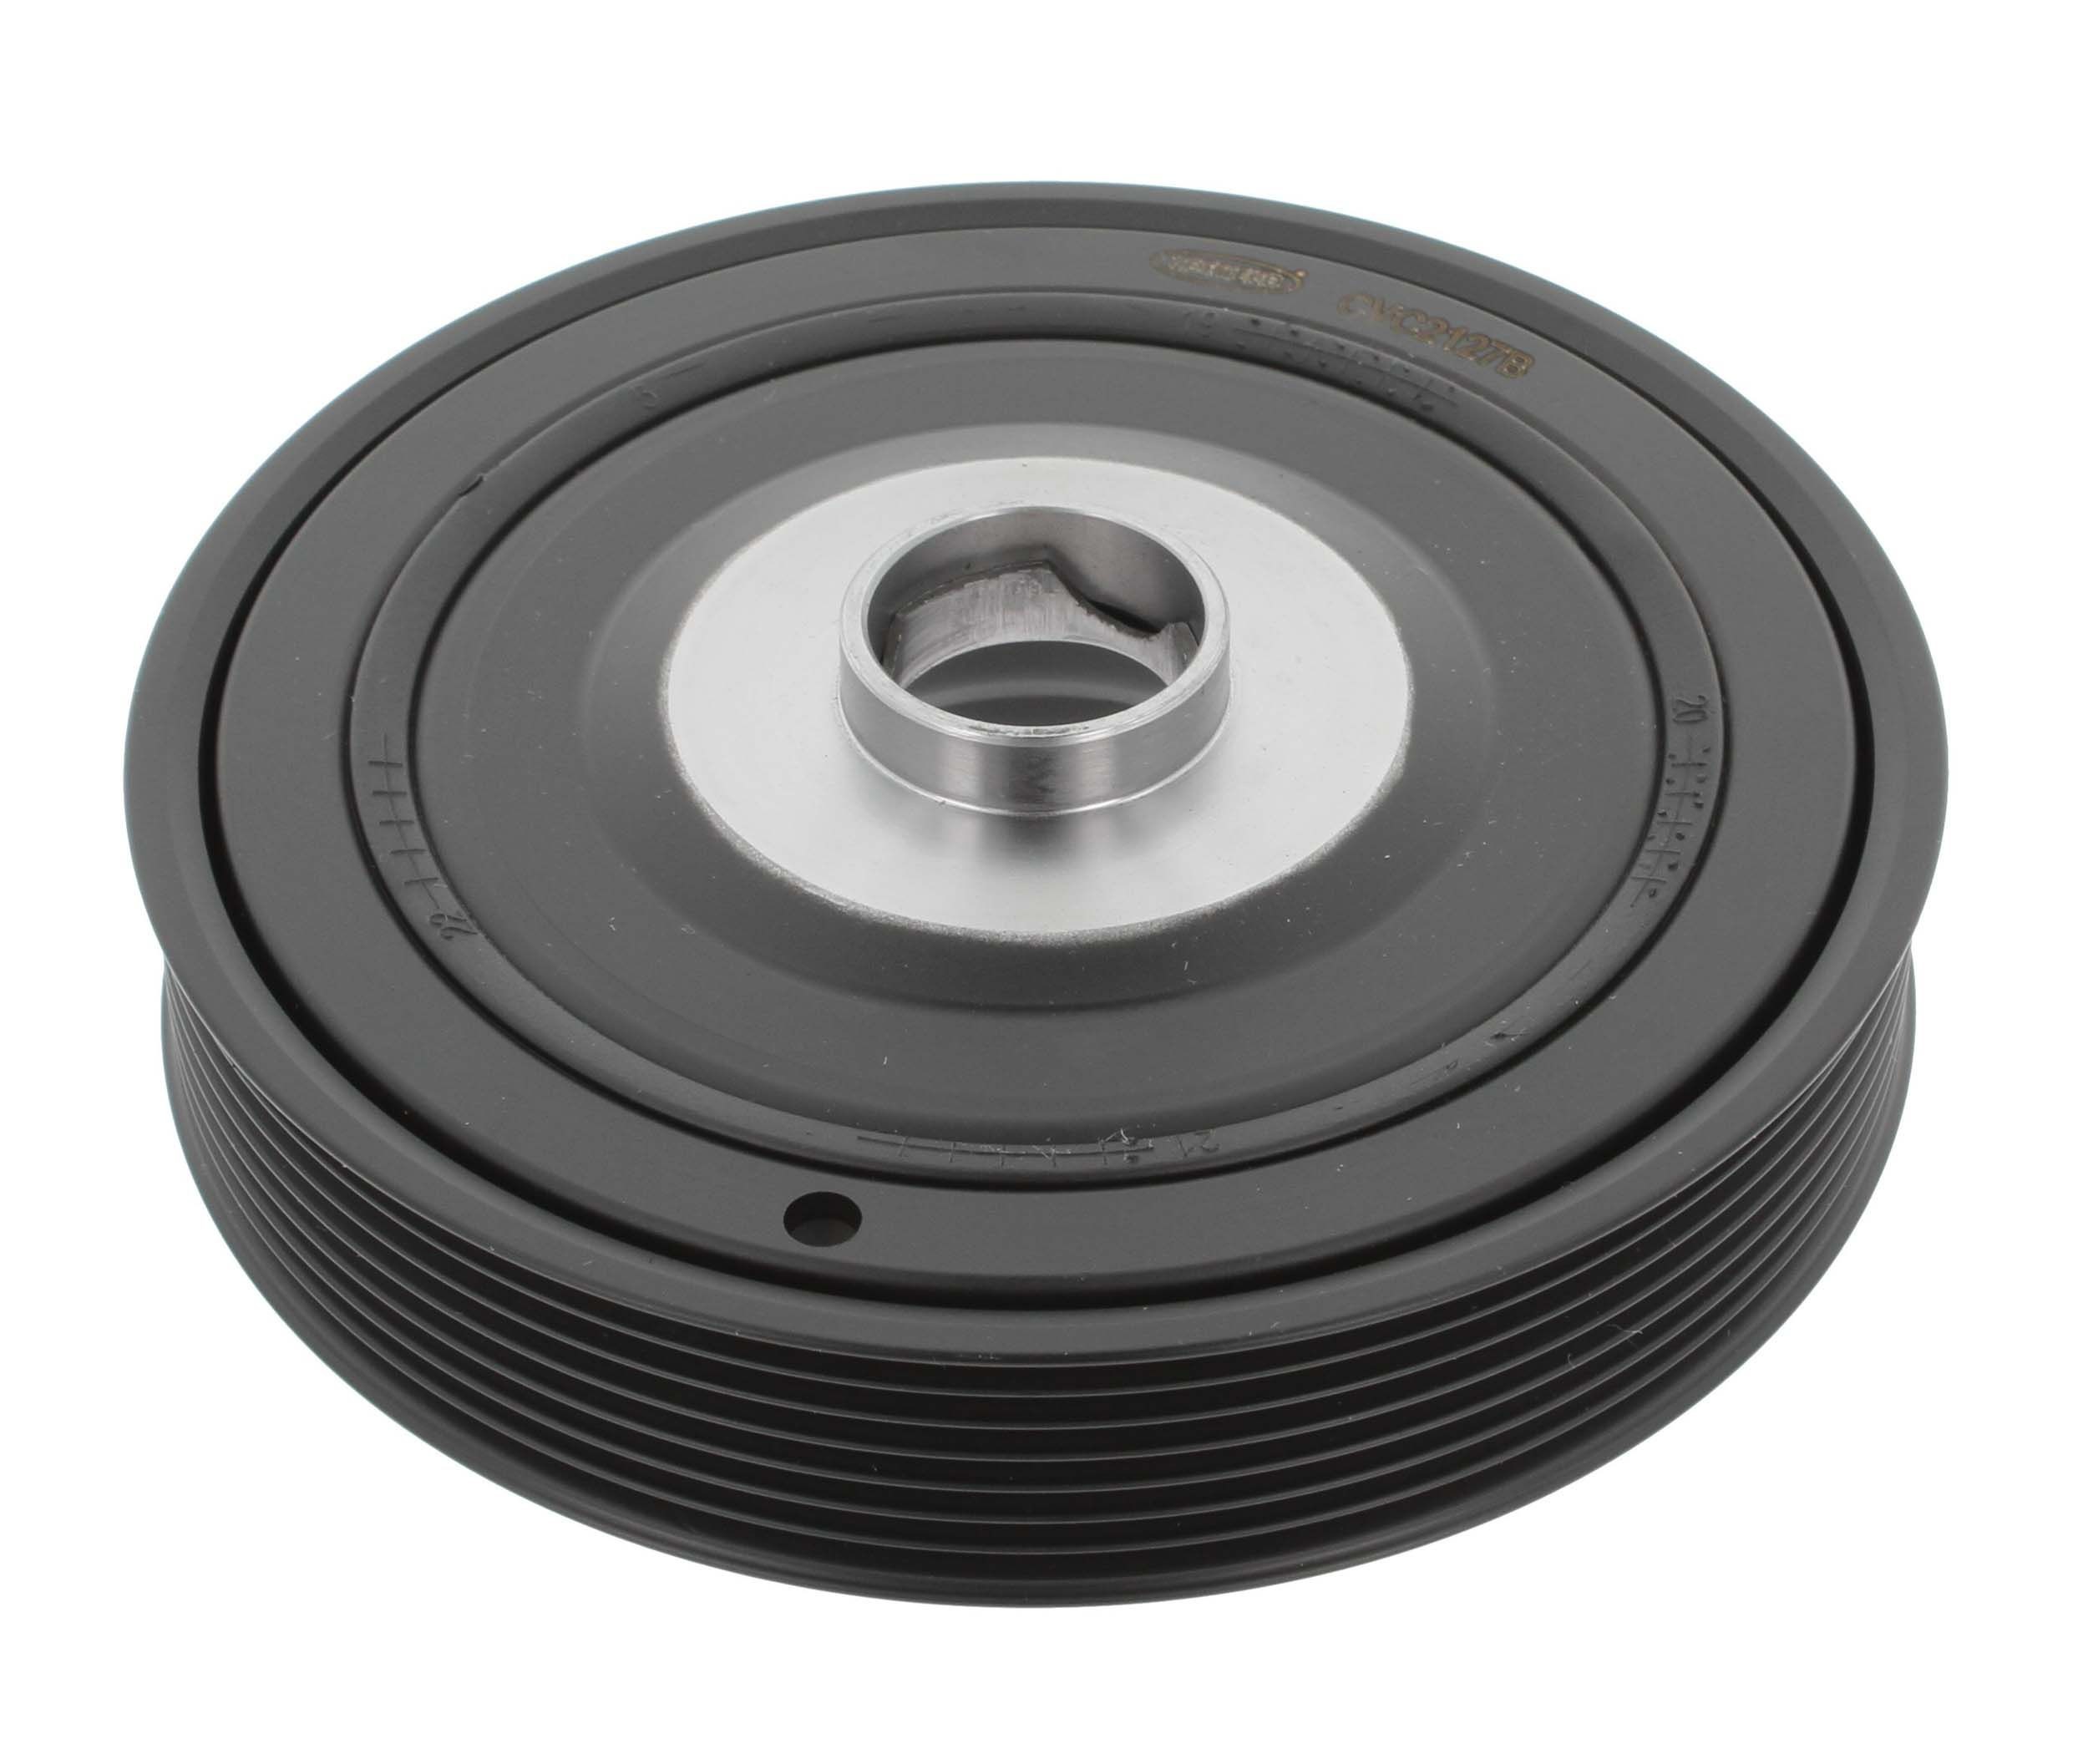 CORTECO 80001093 Crankshaft pulley 7PK, Number of ribs: 6, Decoupled, with mounting manual